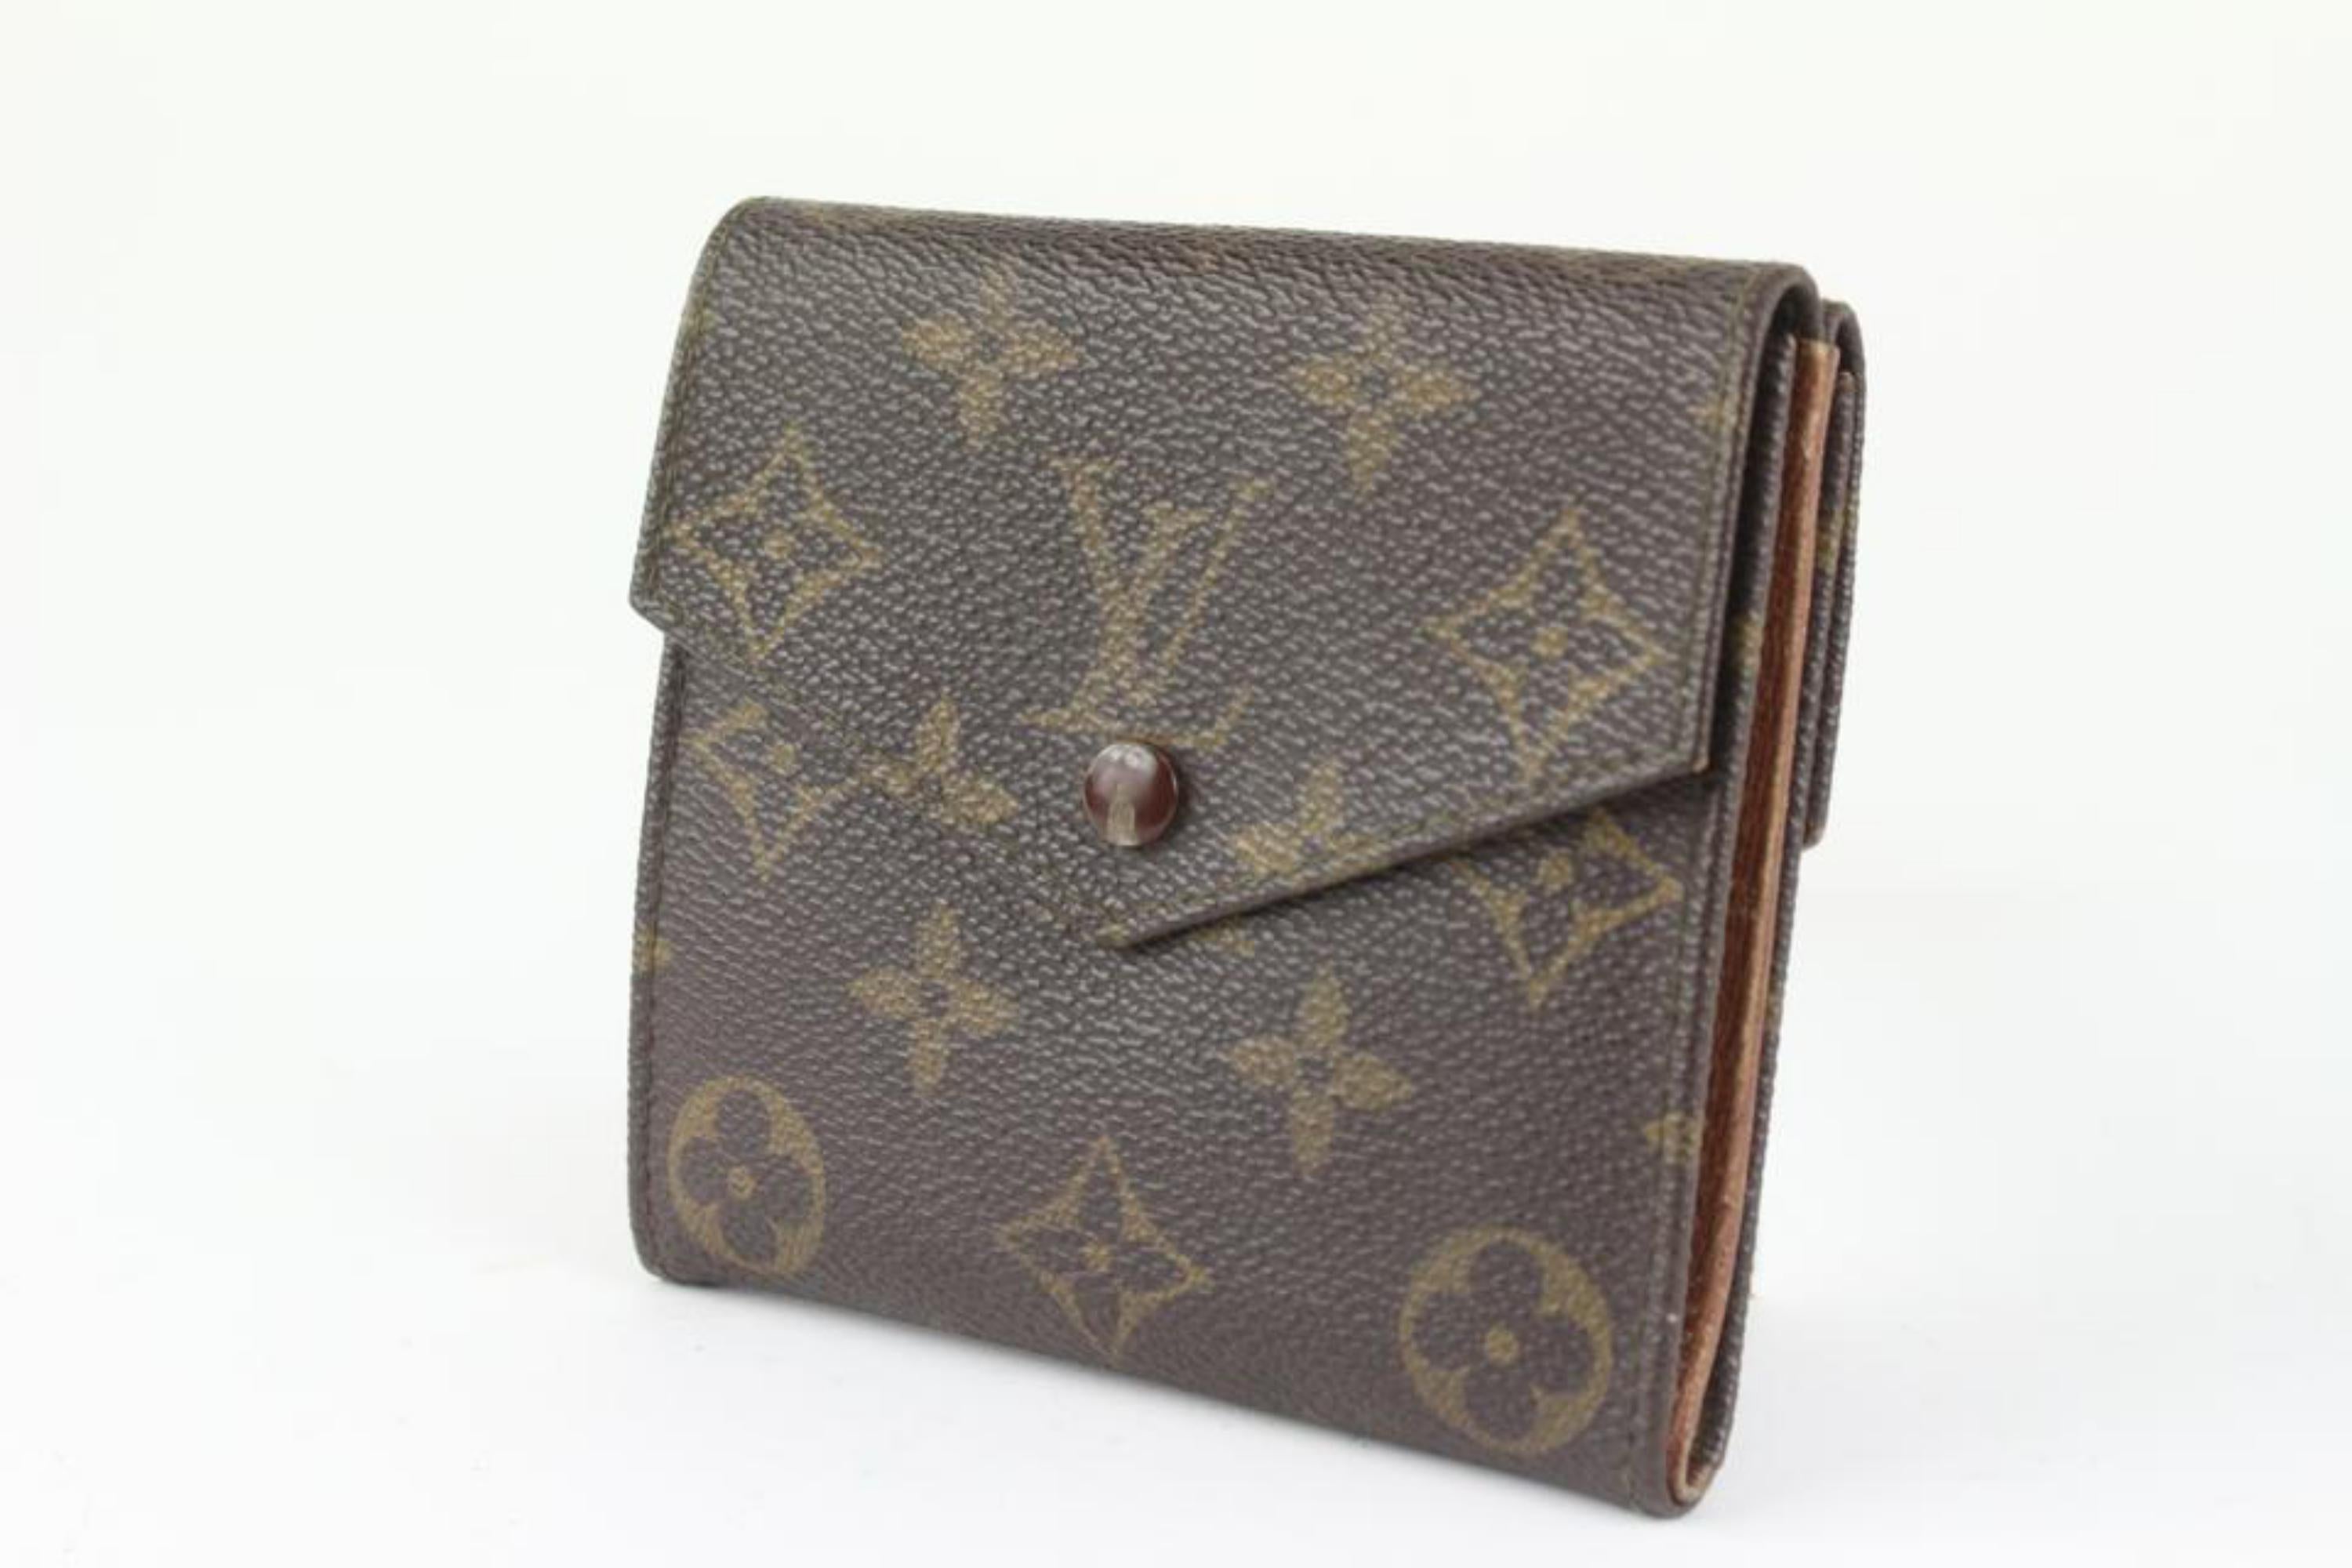 Louis Vuitton Monogram Elise Compact Wallet 1217lv21
Date Code/Serial Number: 8907 AN
Made In: France
Measurements: Length:  4.2